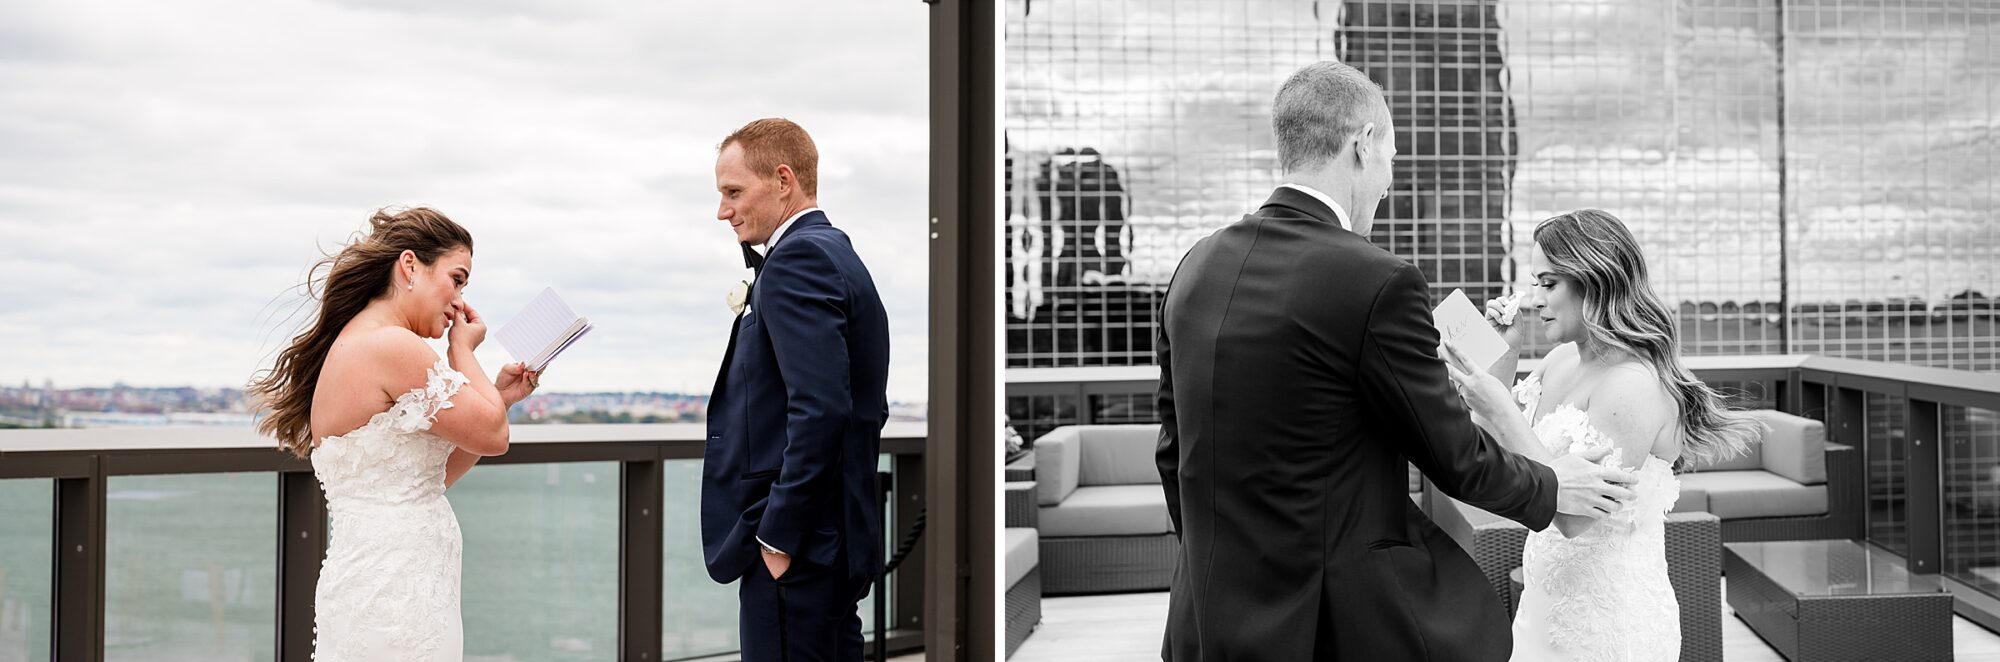 Two photos of a bride and groom on a balcony overlooking the city.